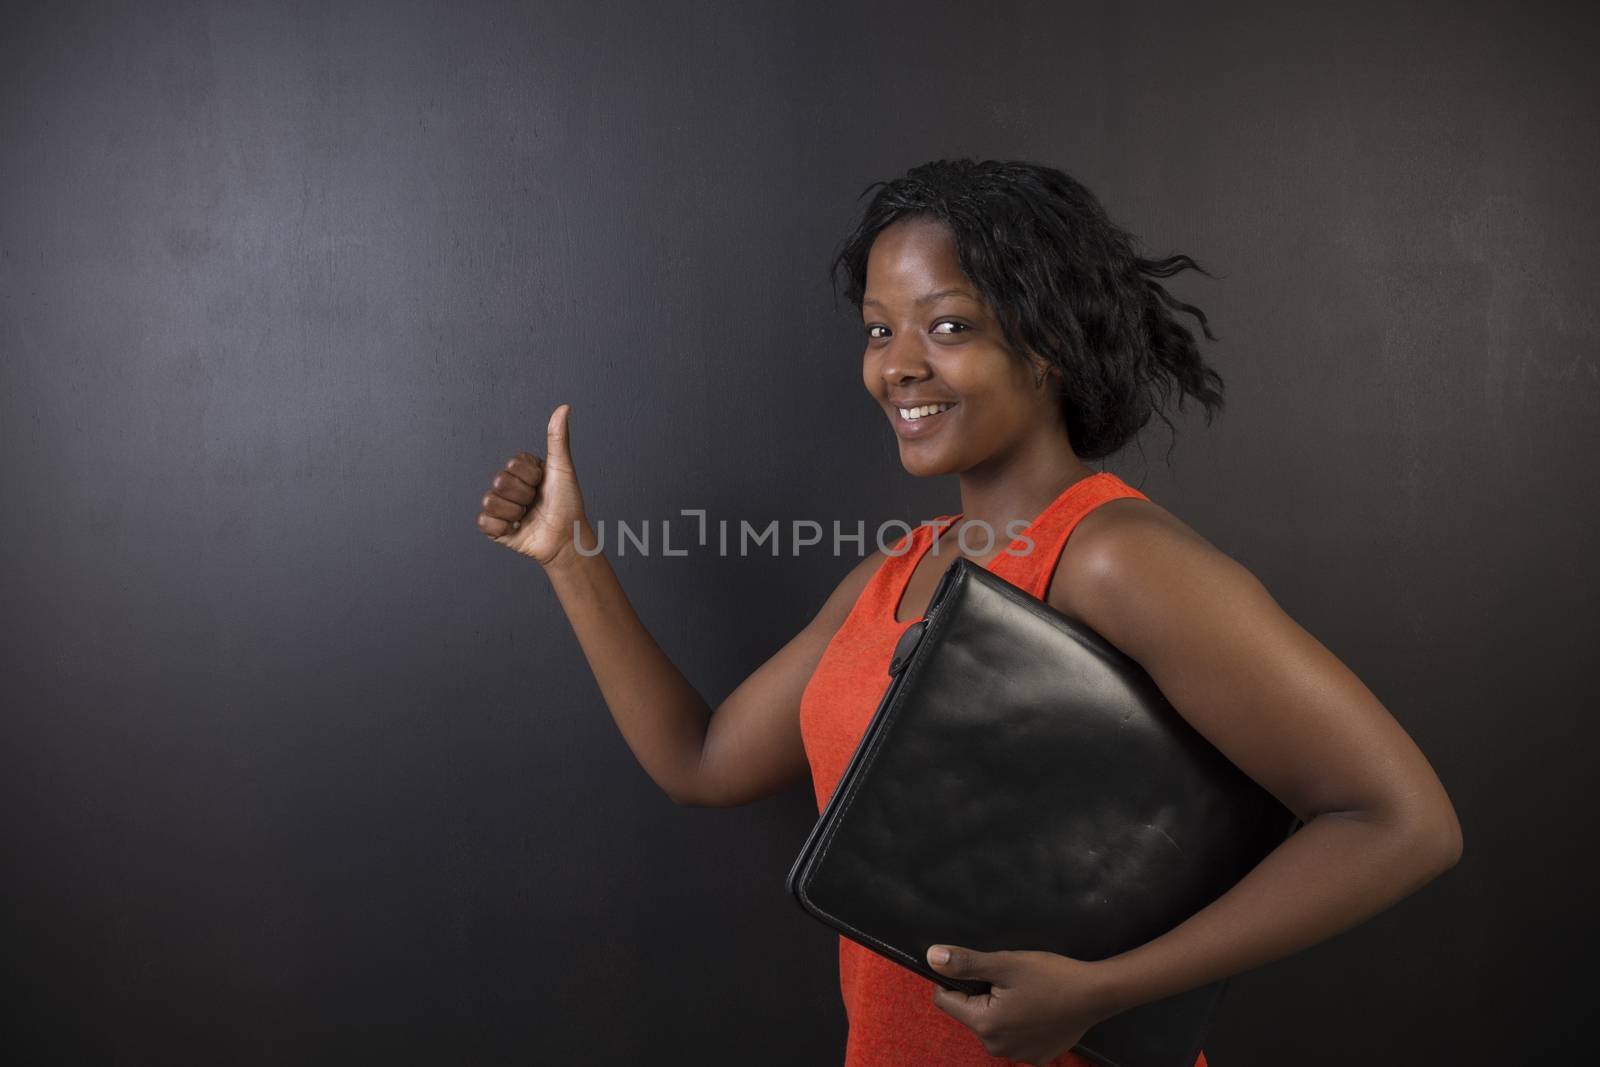 South African or African American woman teacher on chalk black board background by alistaircotton